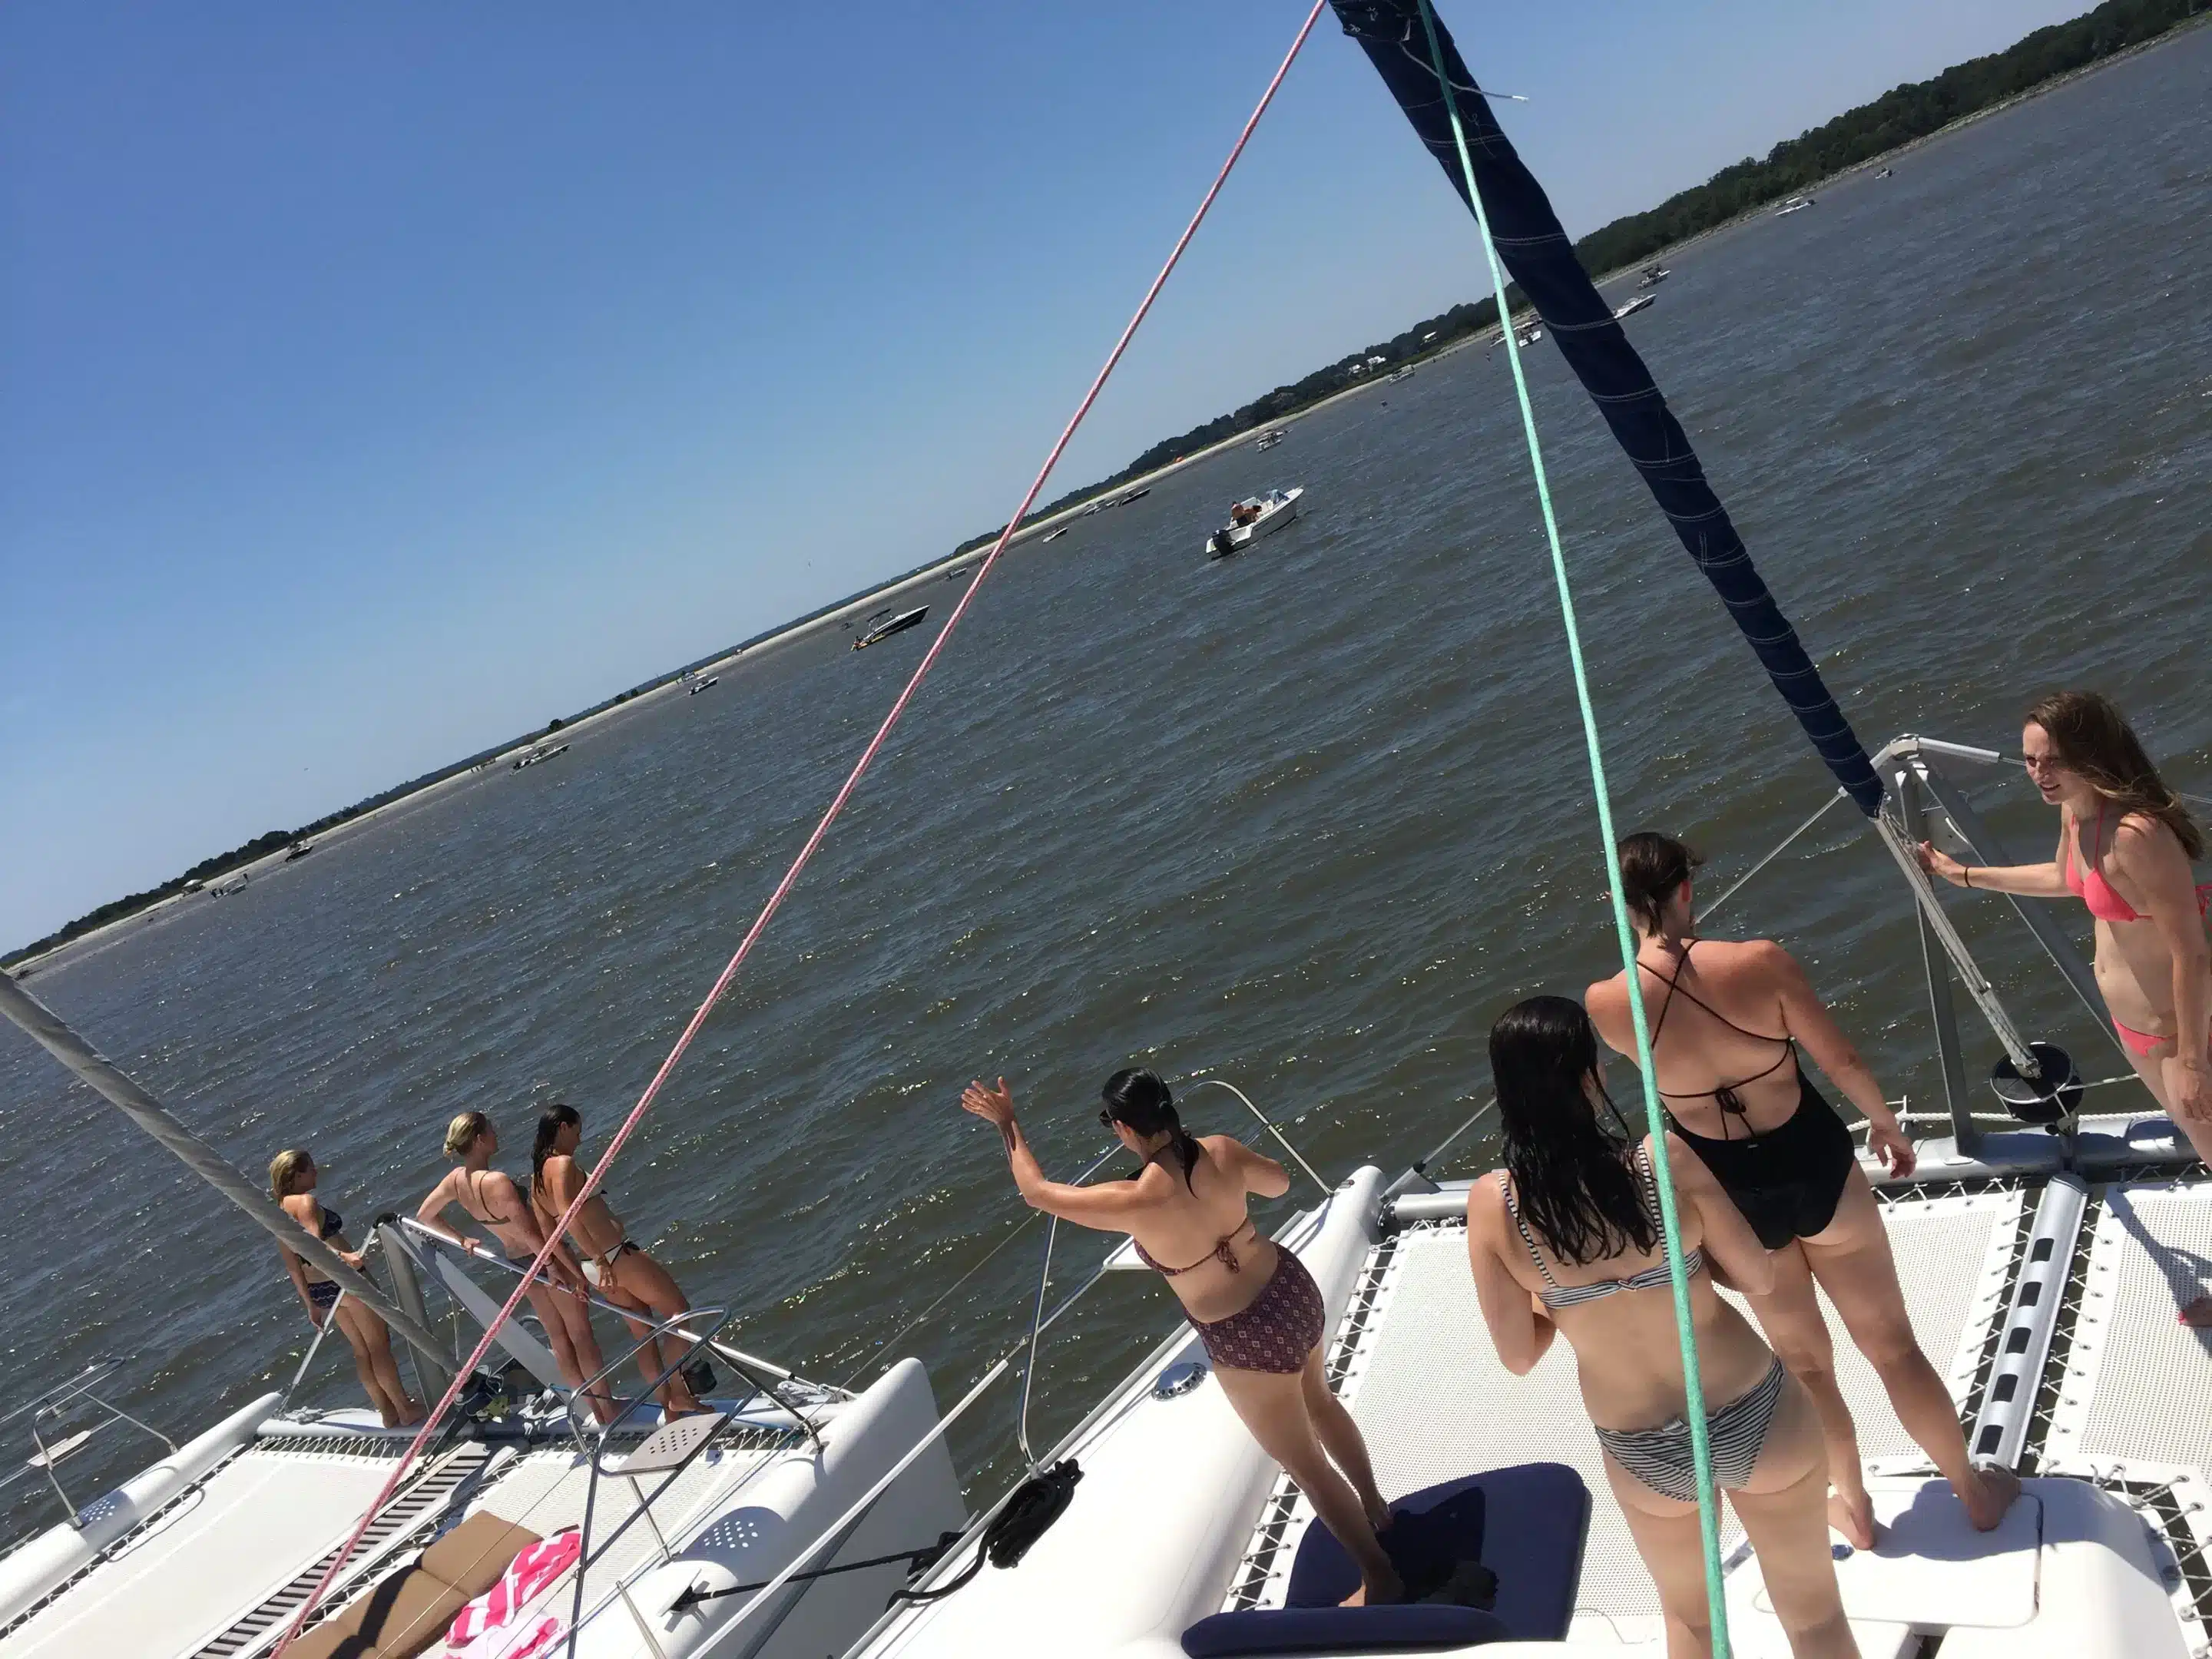 OM can sail with parties up to 6 people!